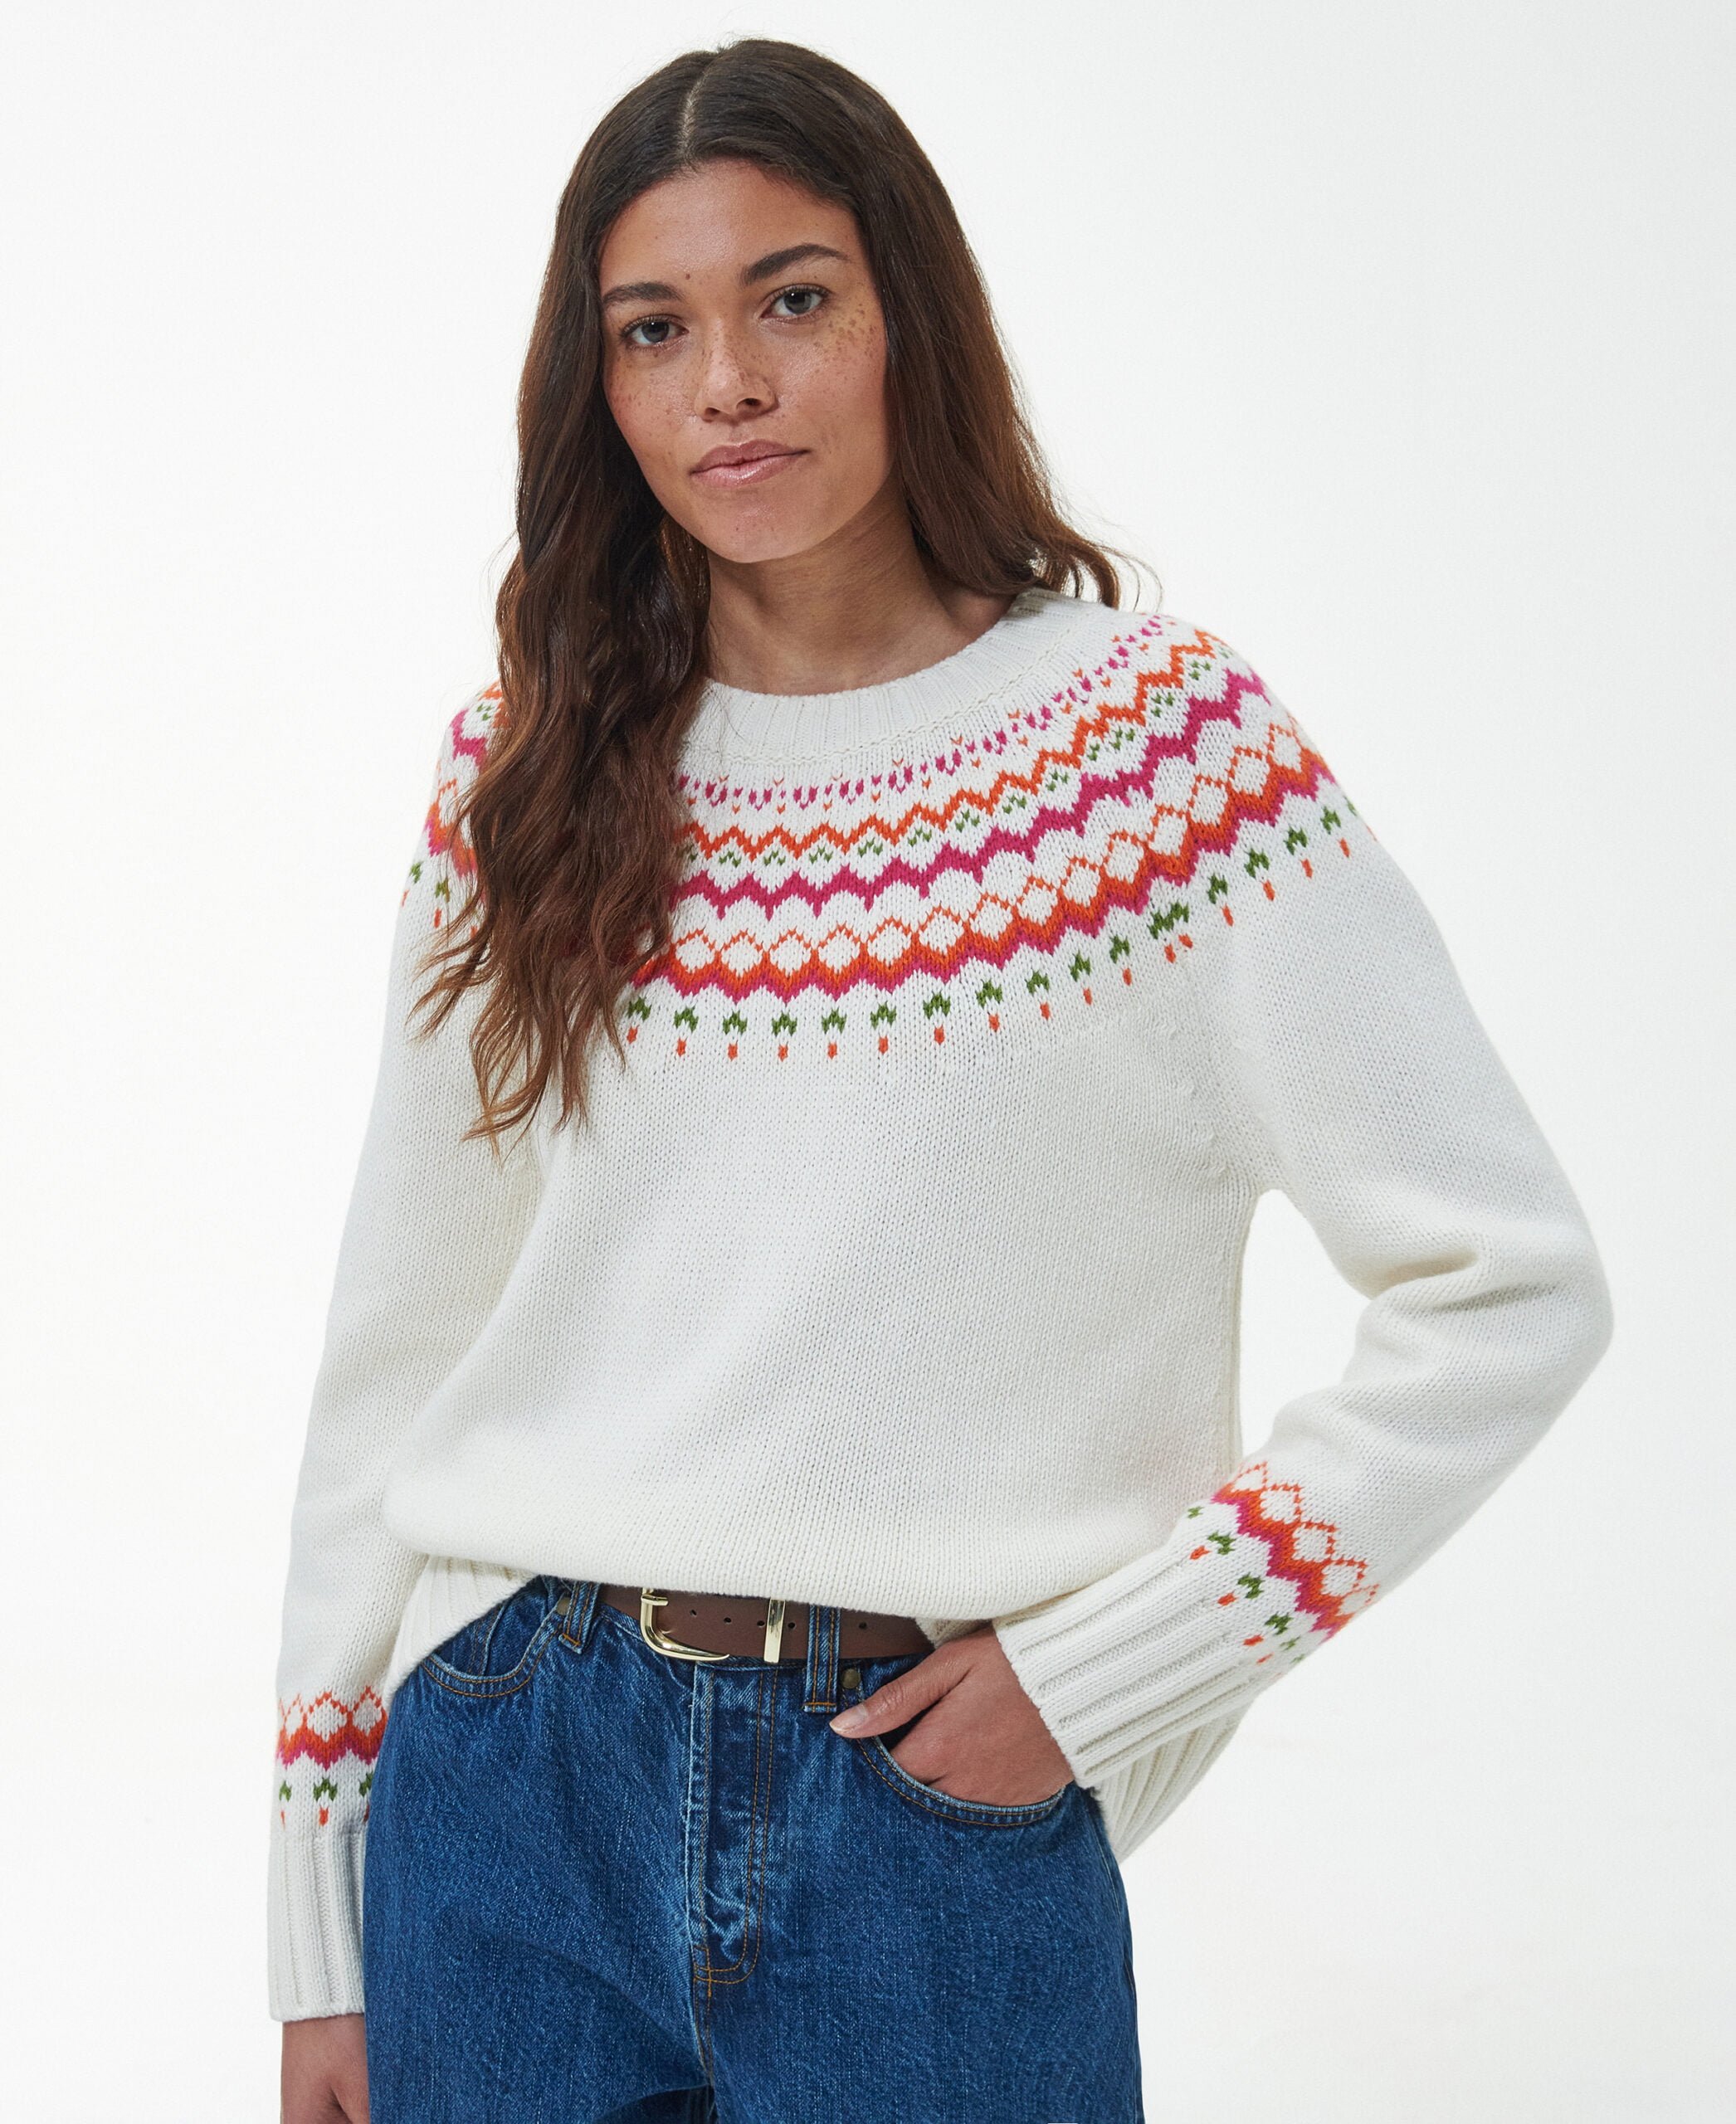 Crew neck knit with fairisle design around front and back yoke and cuffs. Full length raglan sleeves, finished with ribs at the cuff and hem. ID patch at back neck.